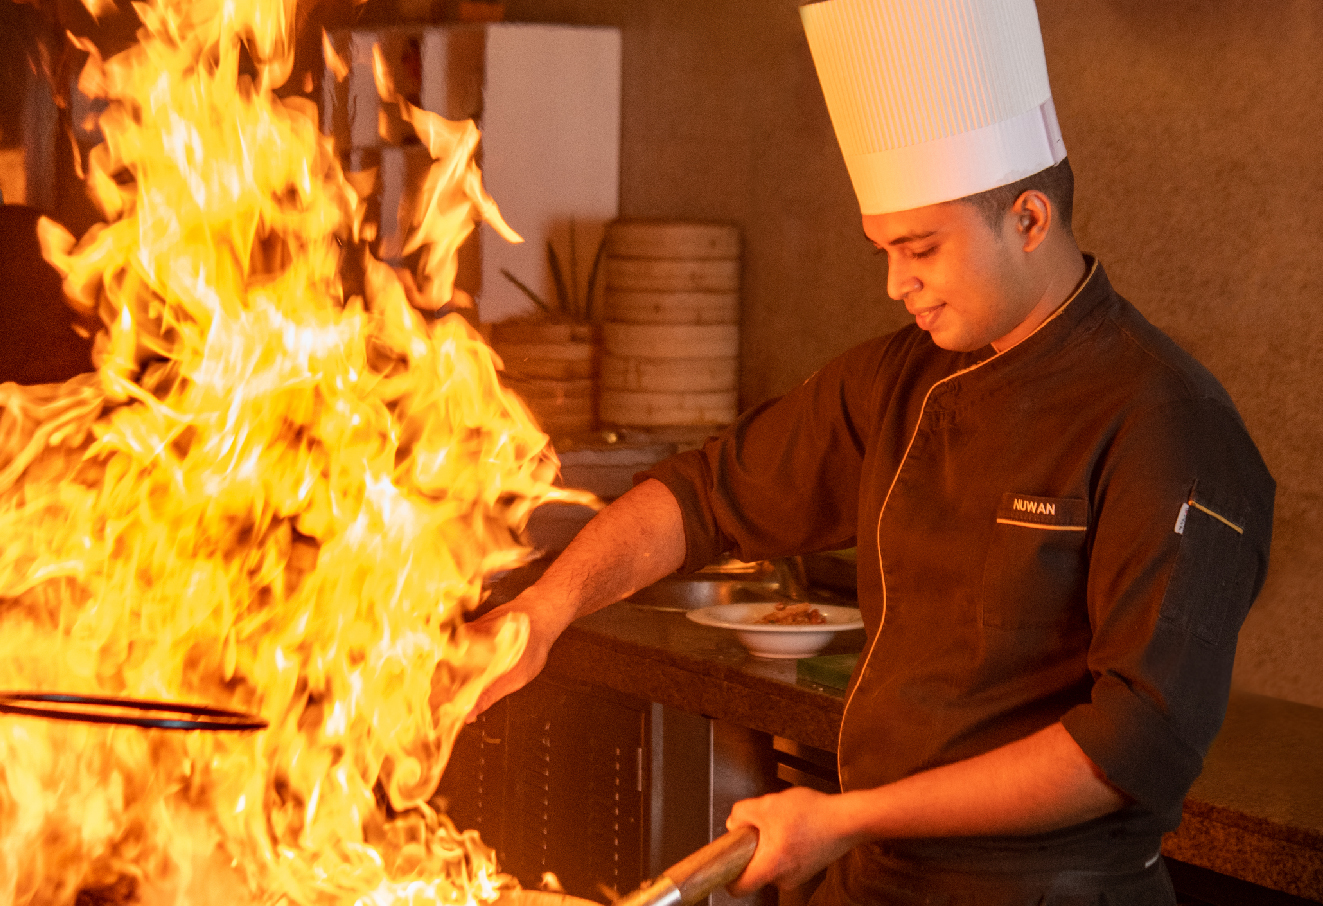 Chef in action with flame wok